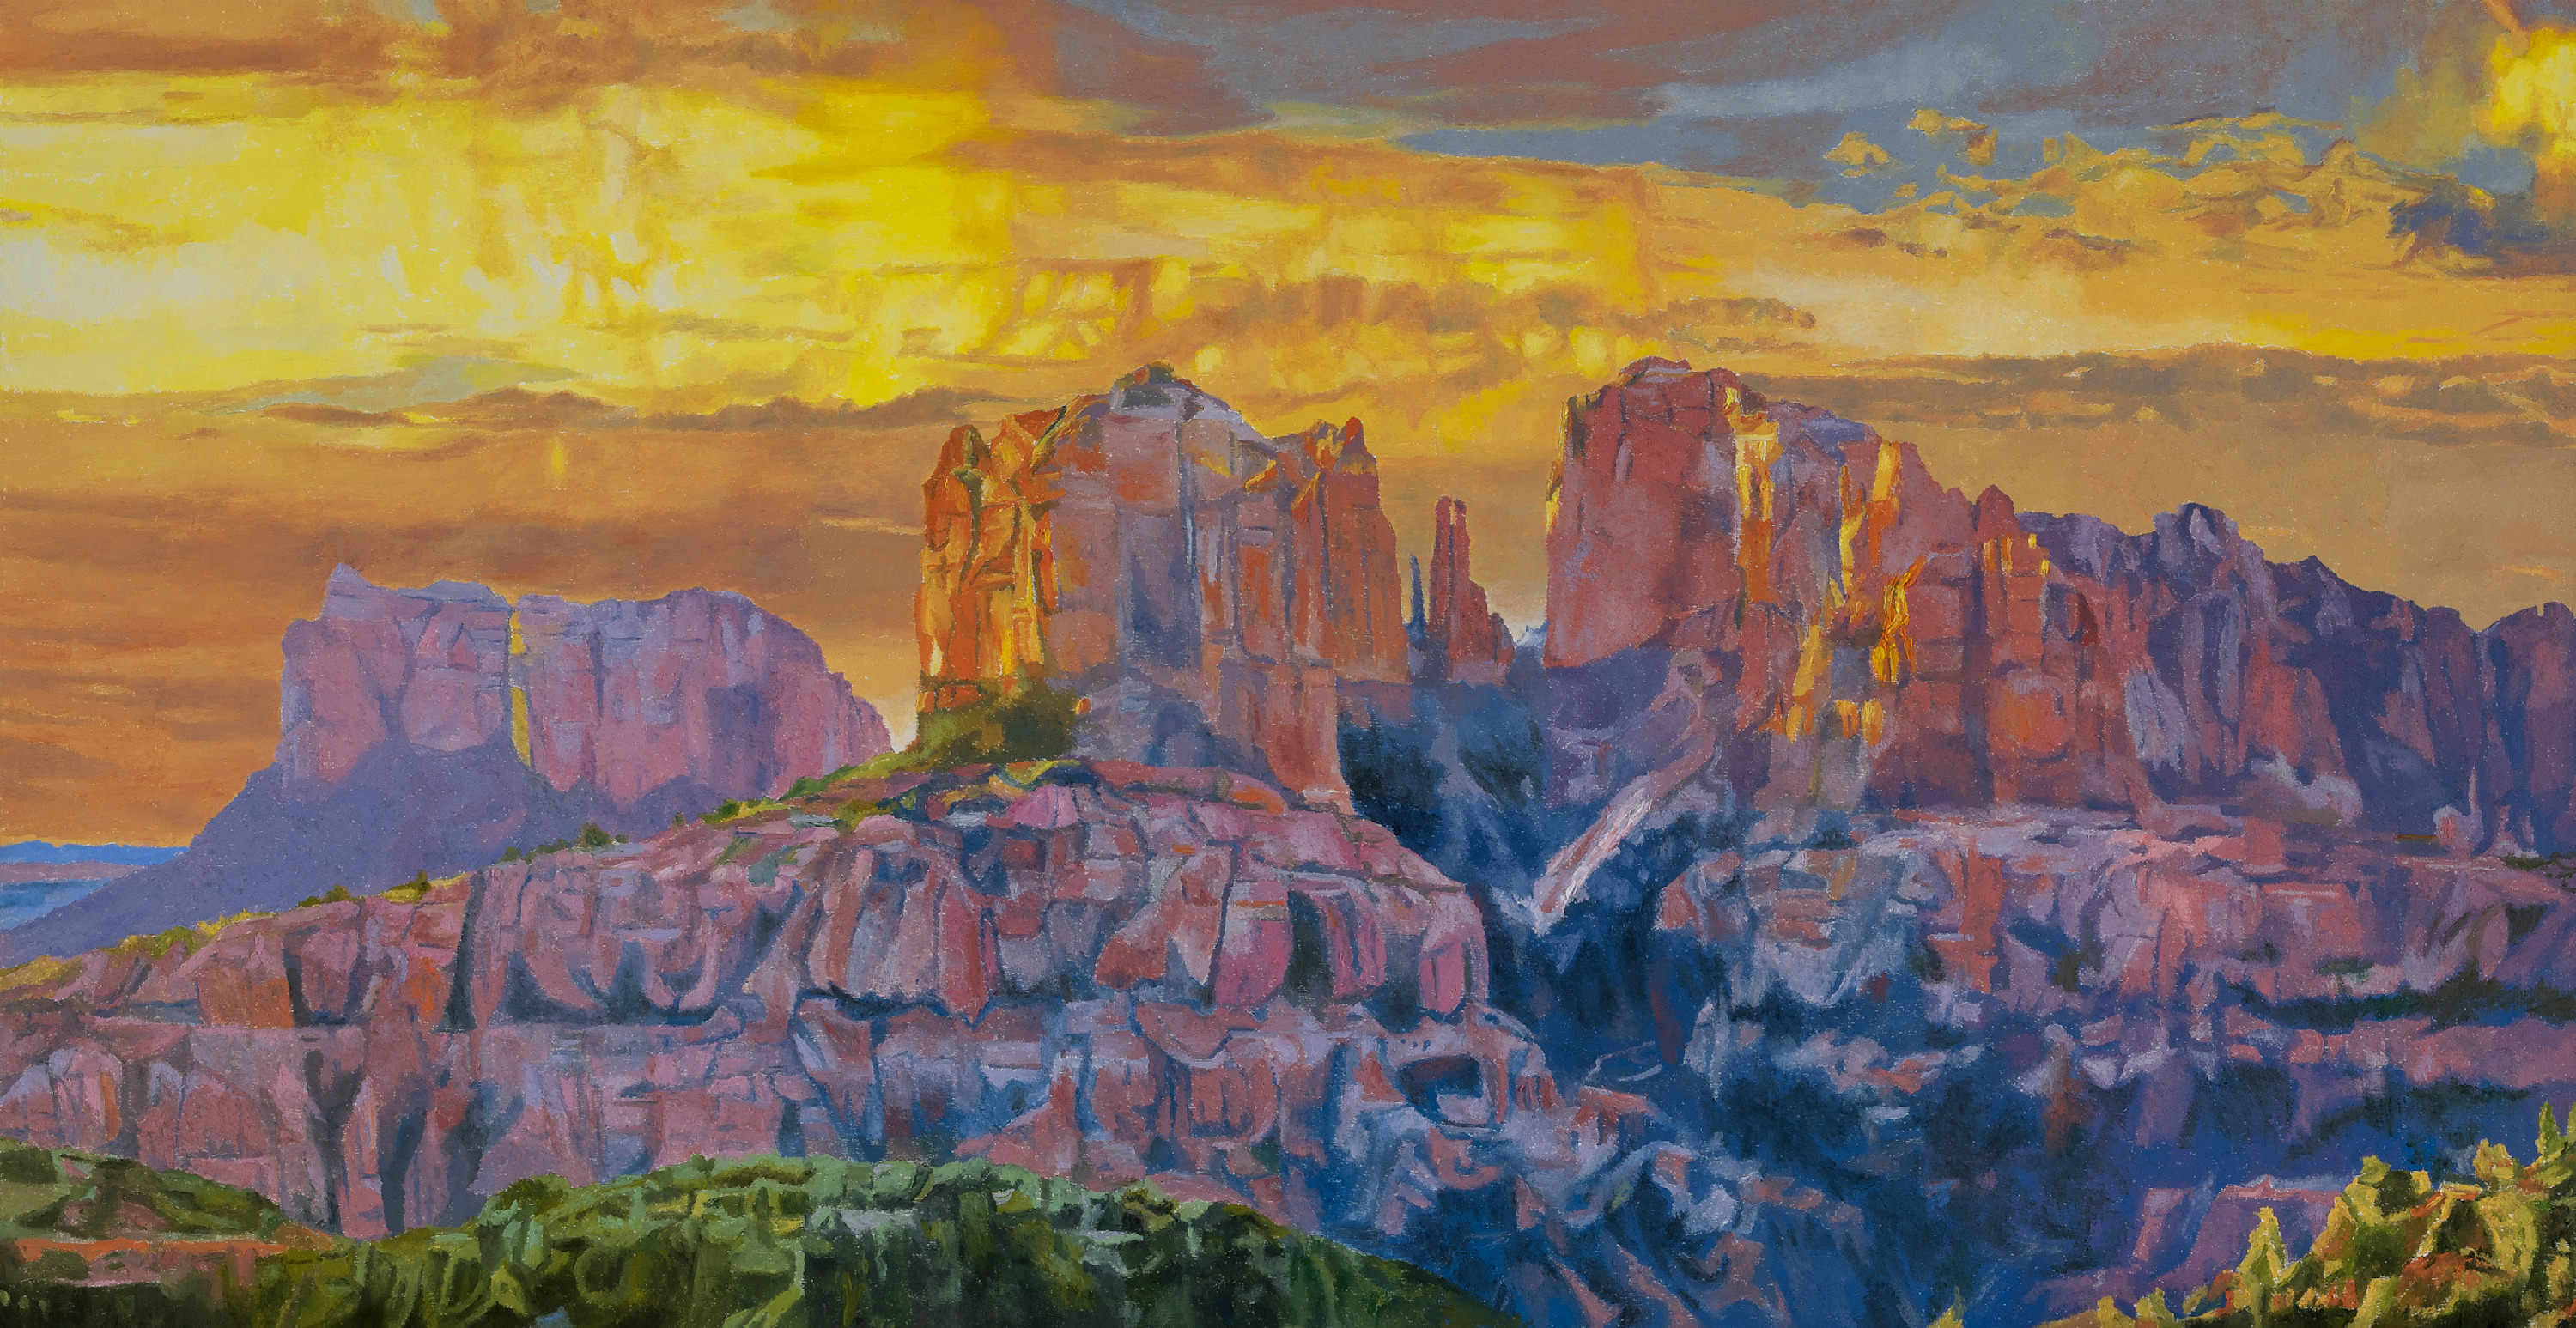 Cathedral rock sedona limited edition image fwpafc